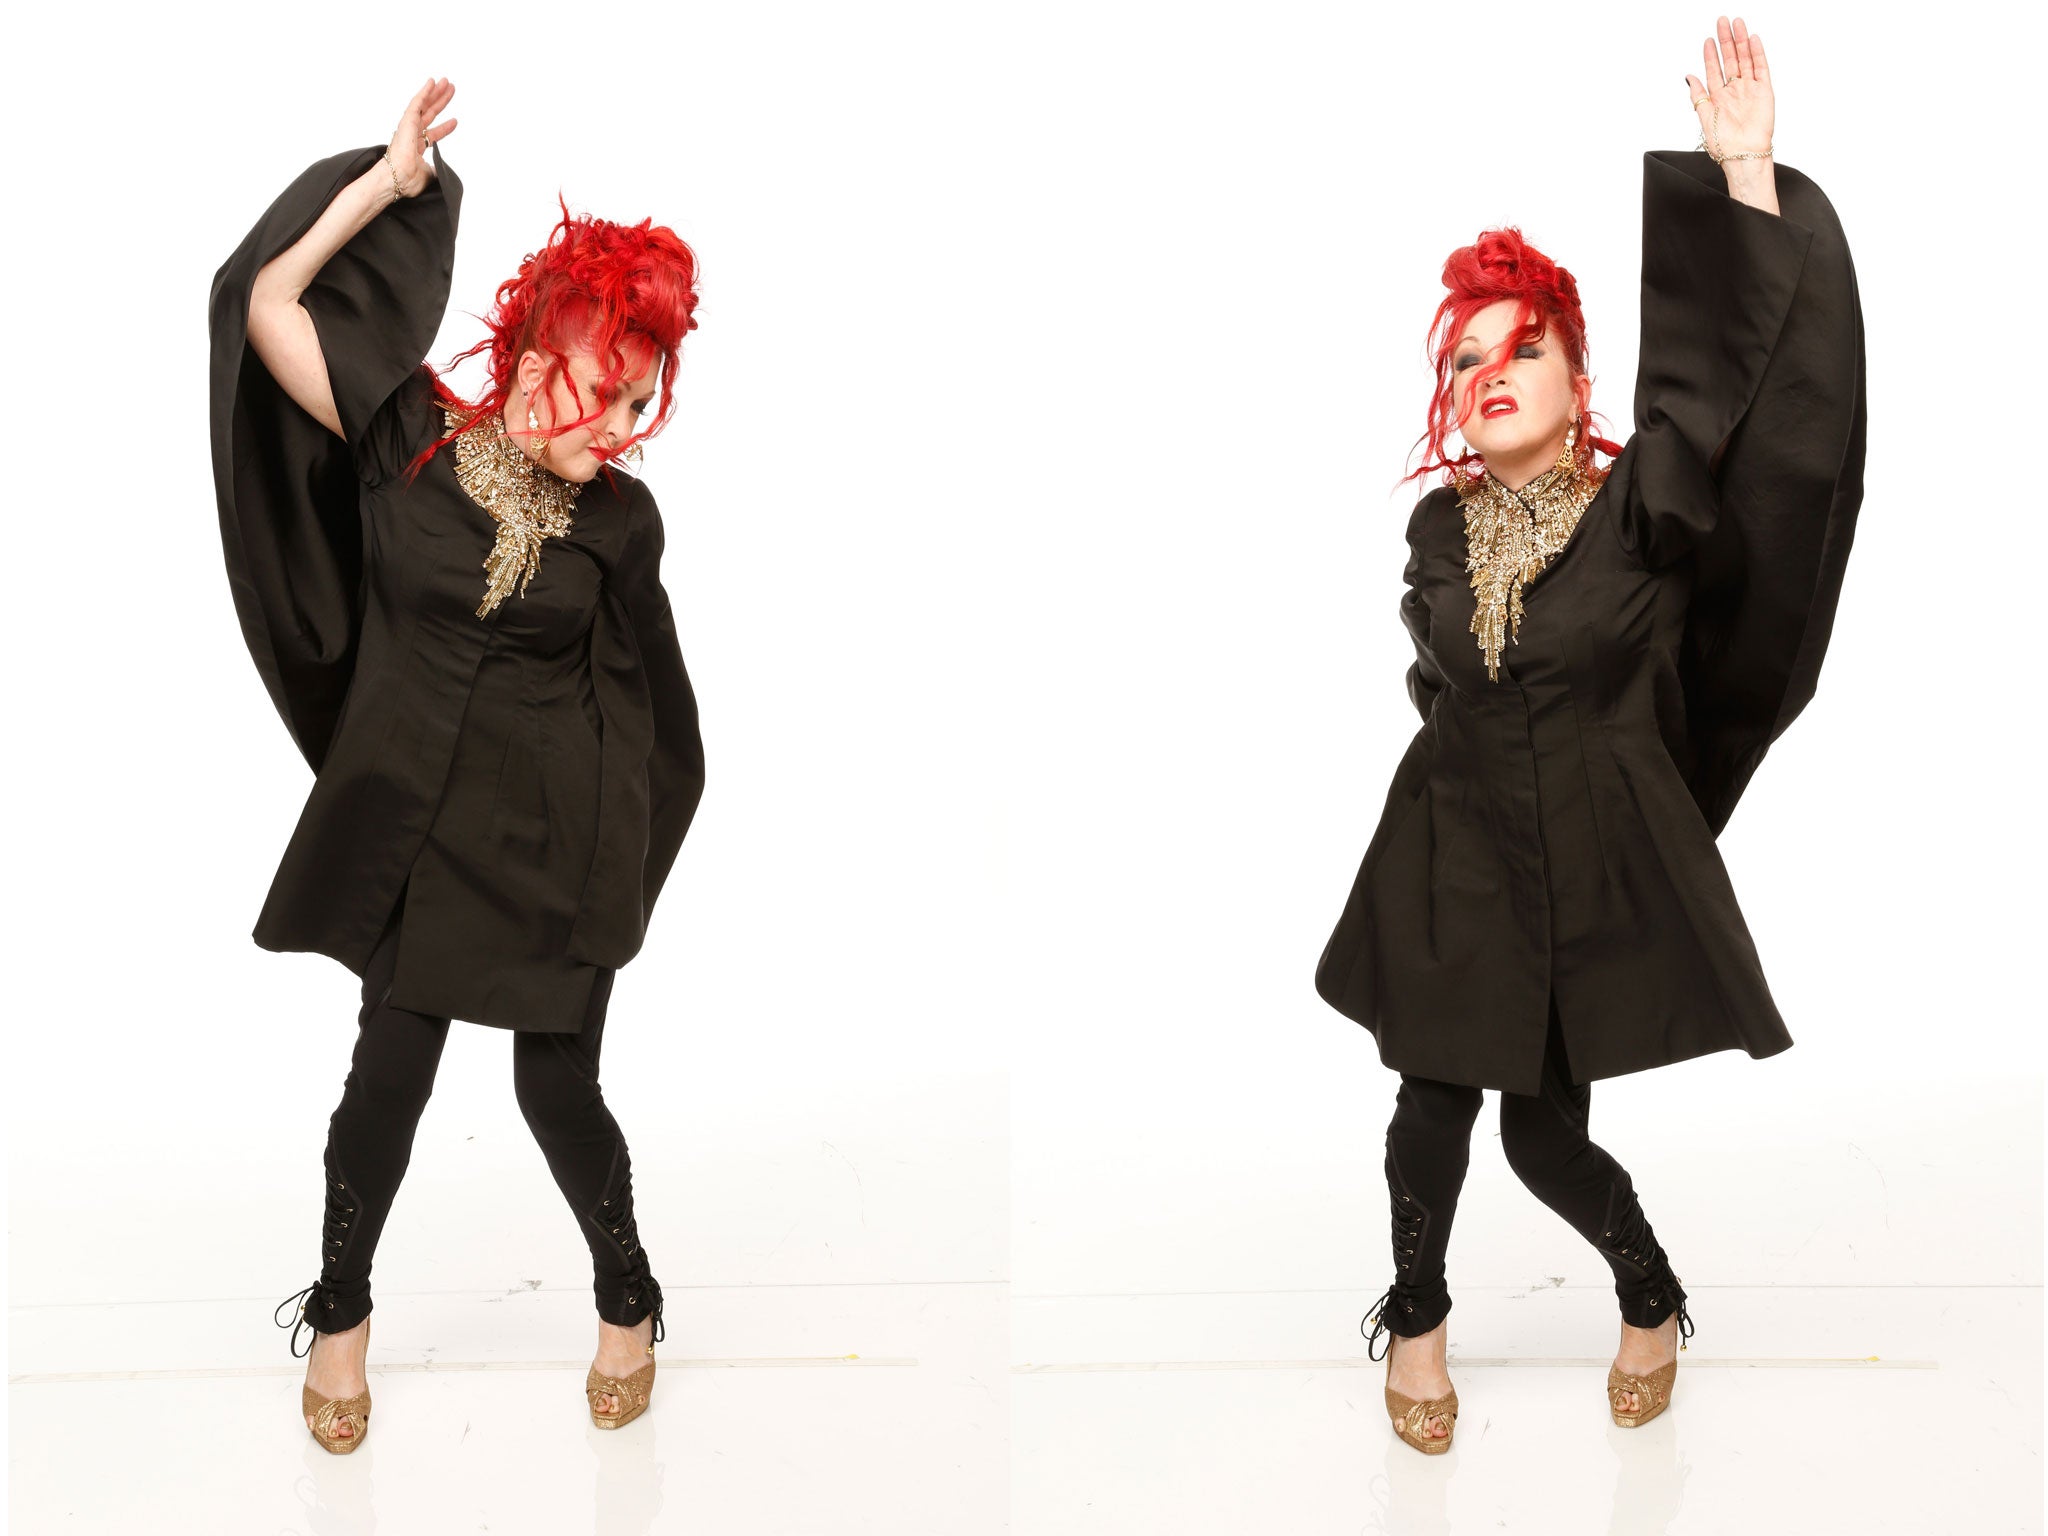 She bop: Cyndi Lauper at the Grammys this year